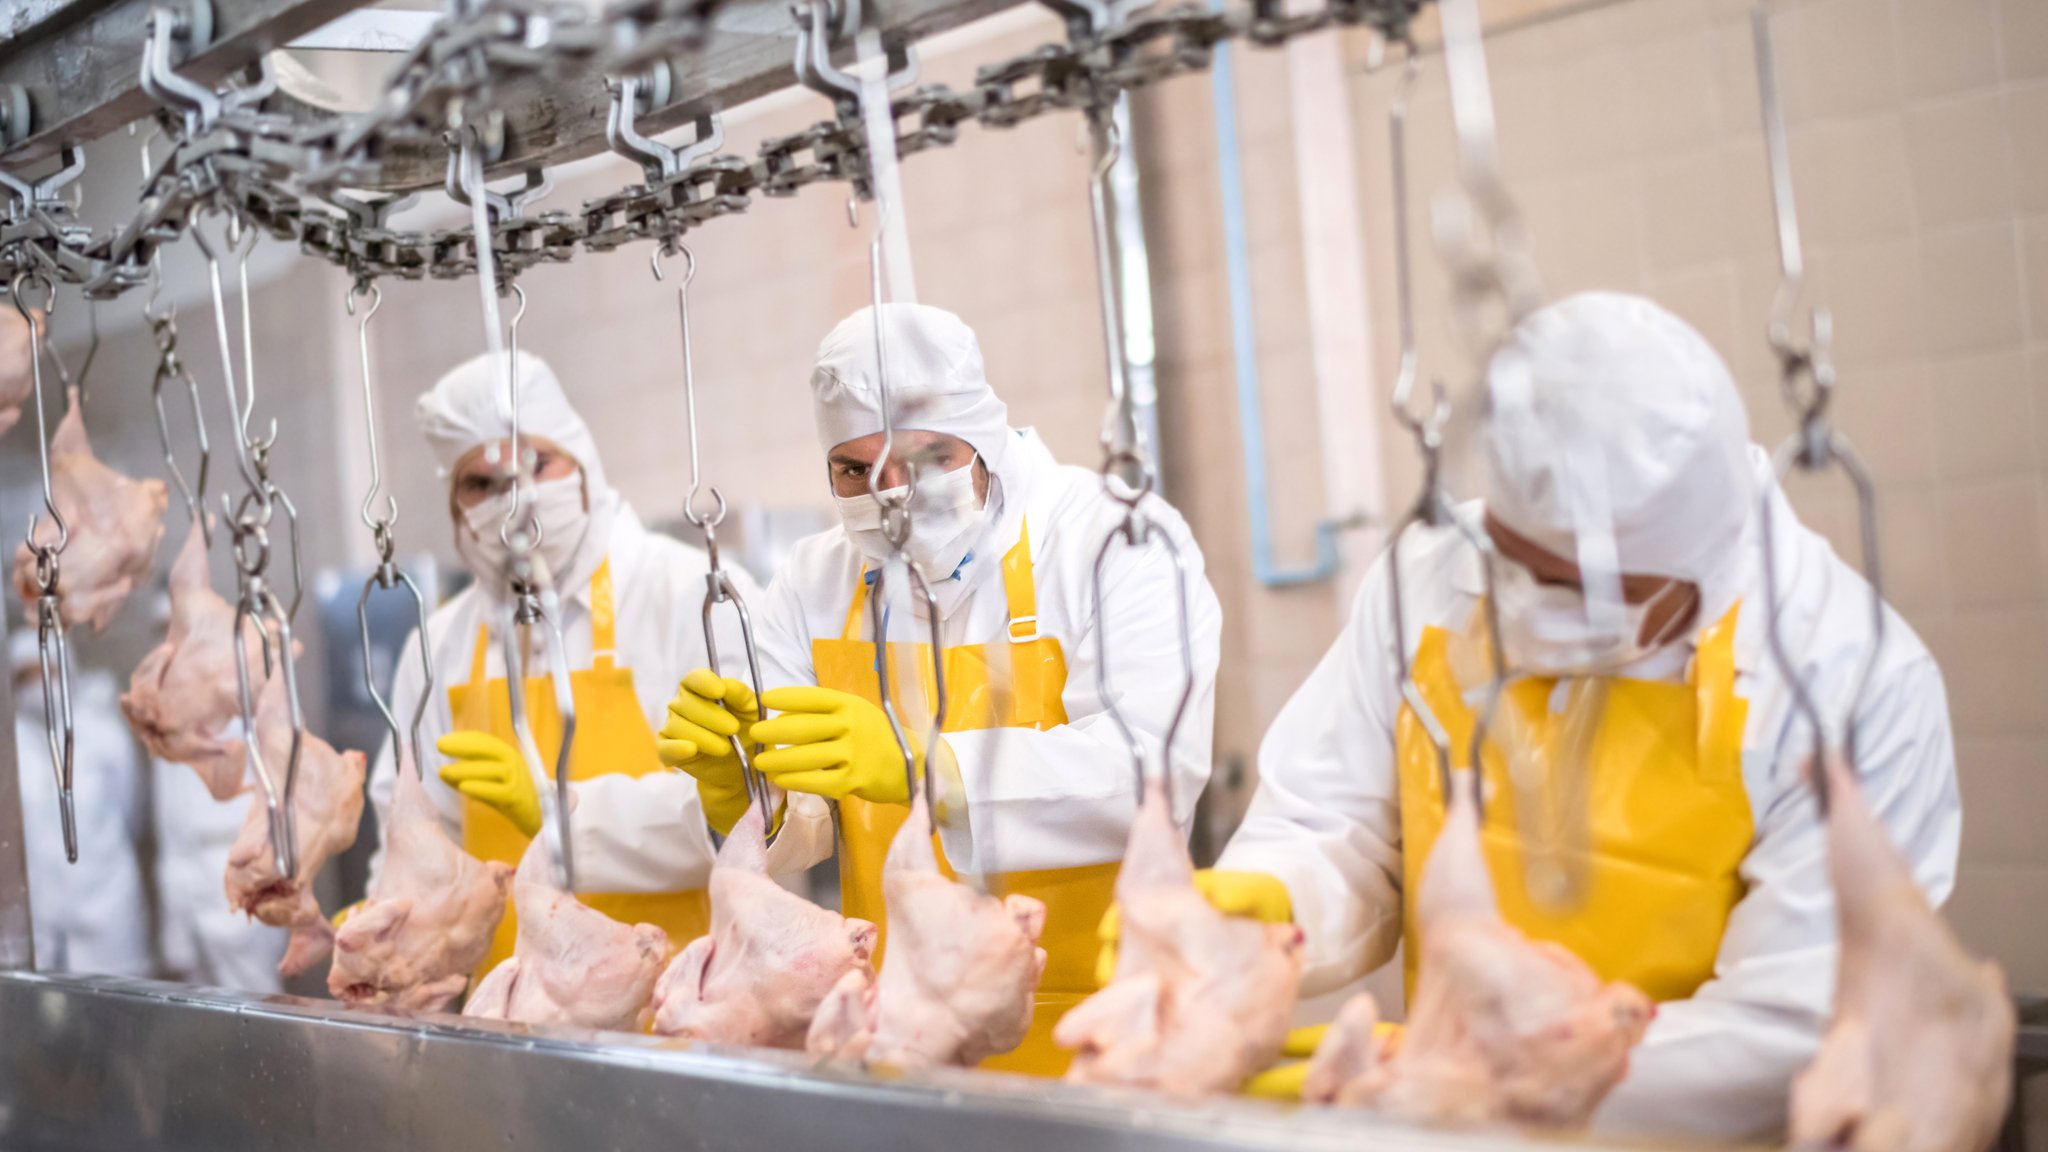 Line speed and safety in the poultry processing industry